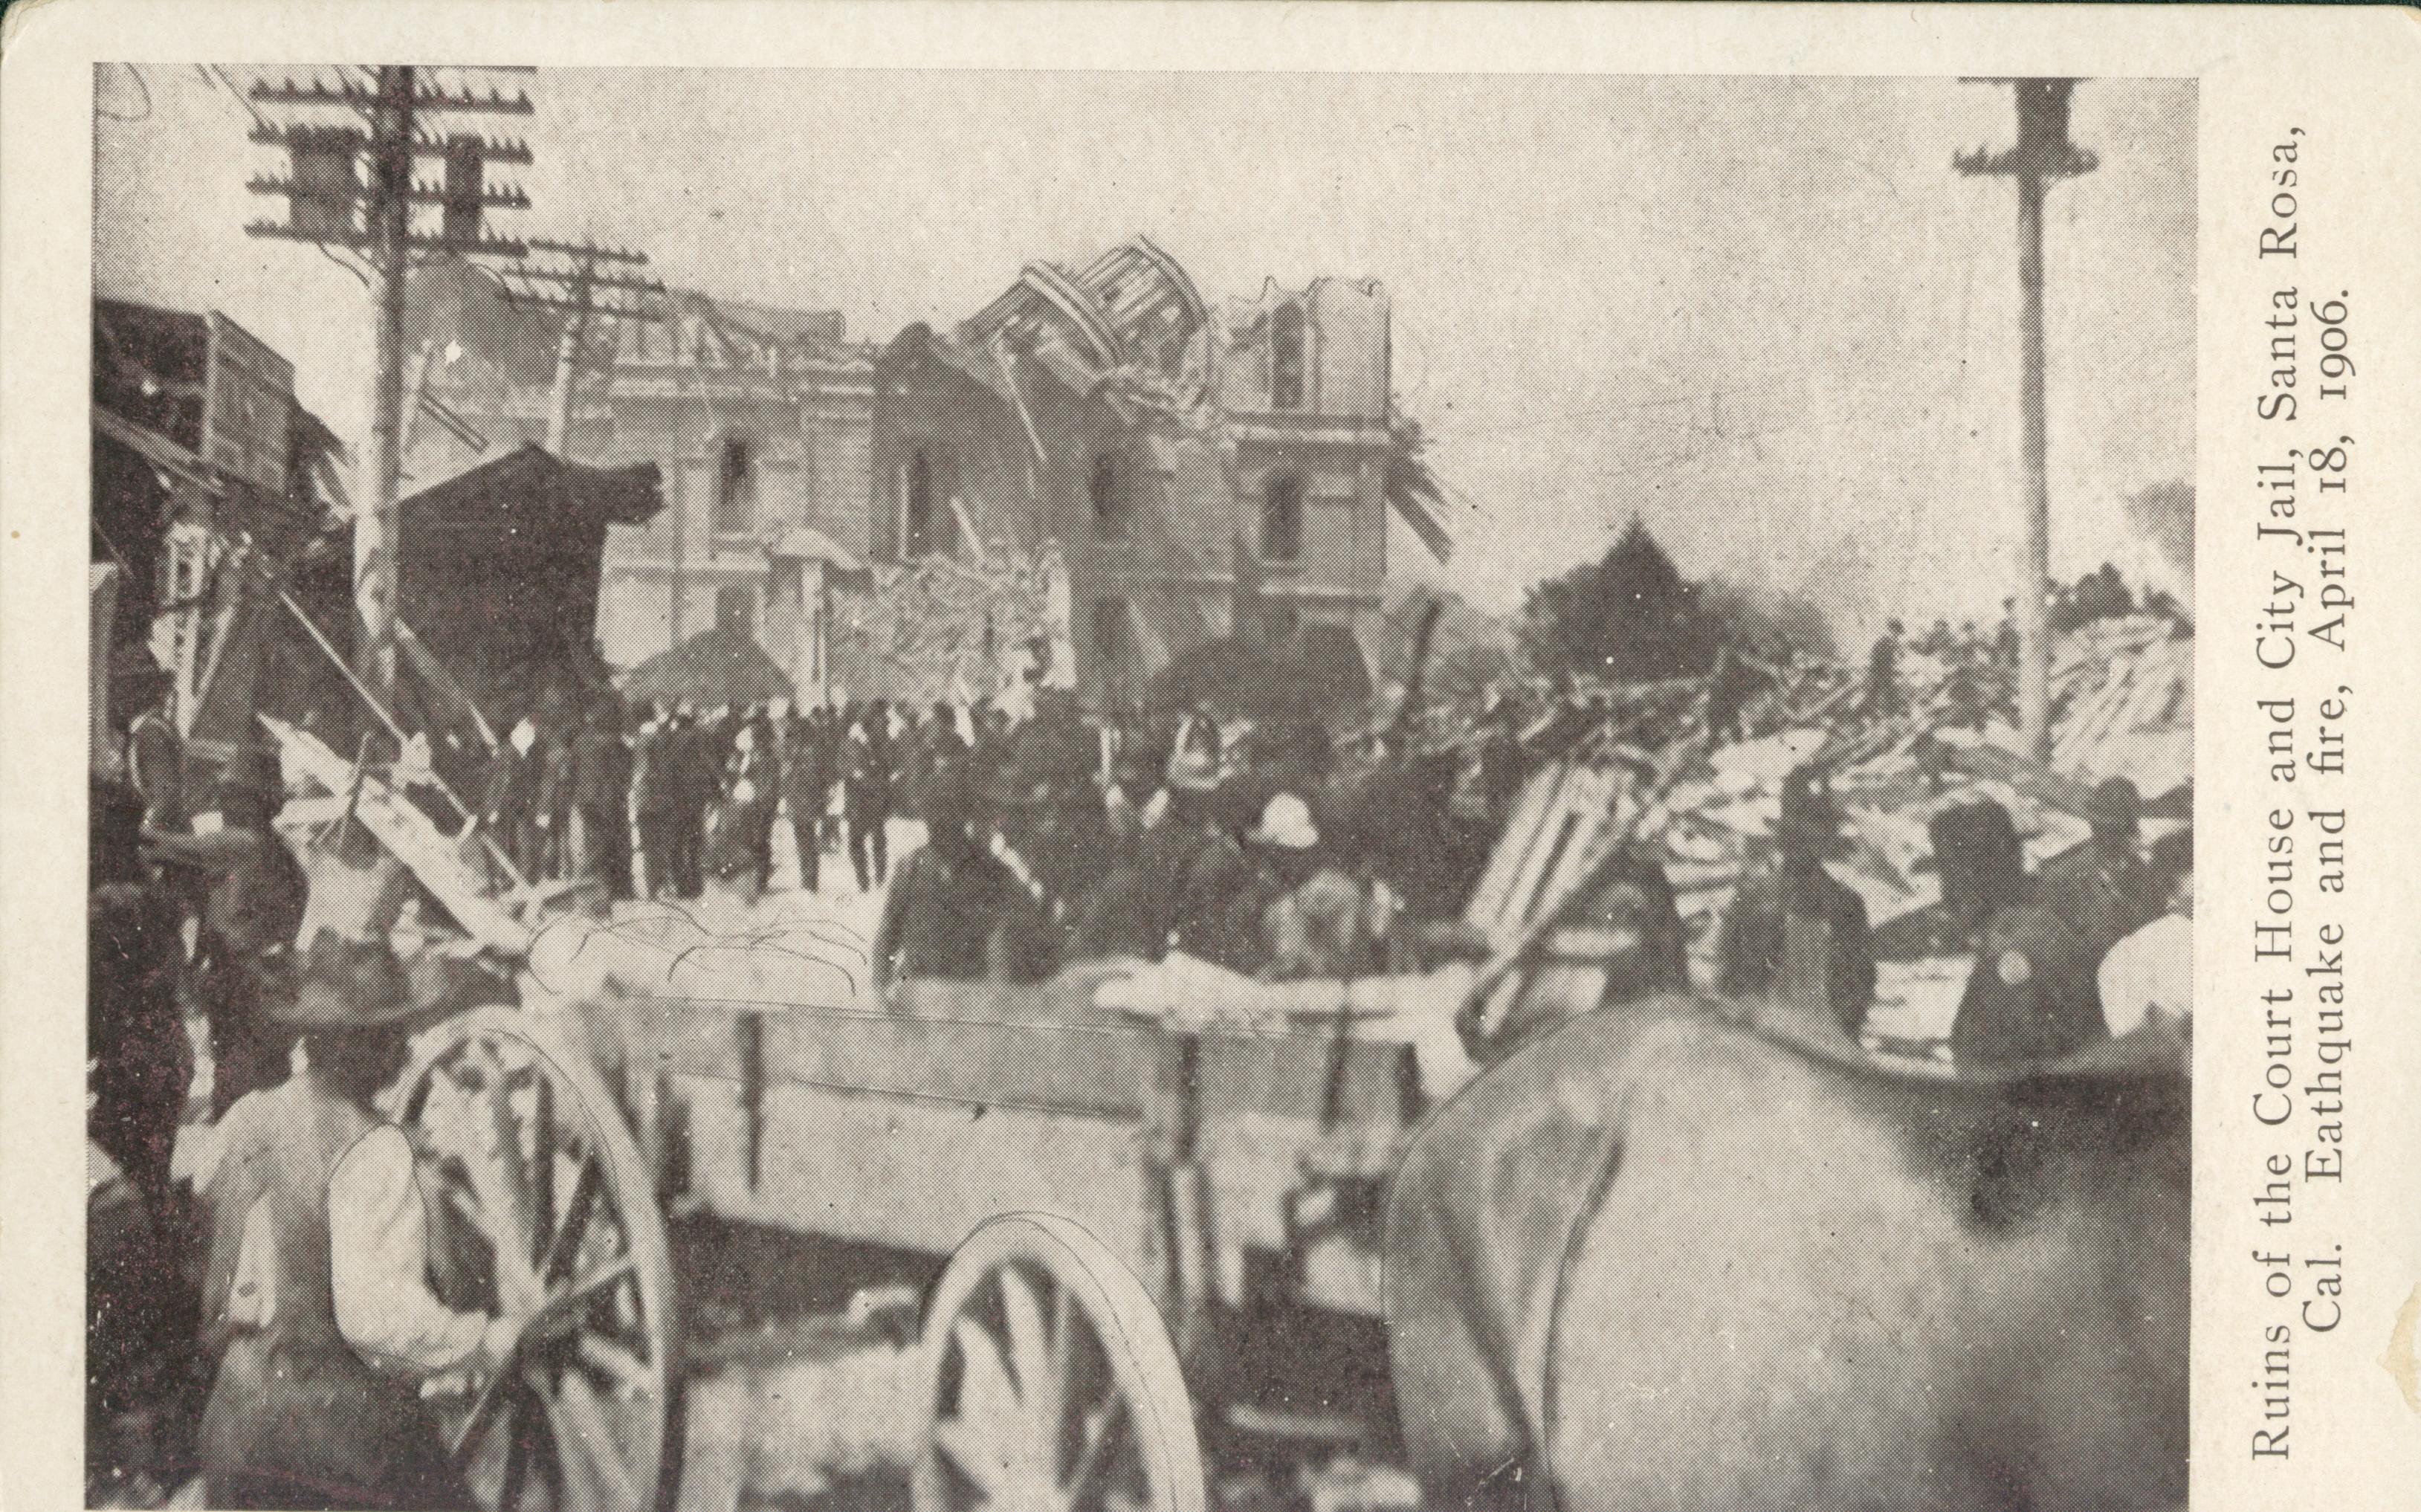 Shows the collapsed courthouse and jail with several people and carts in the foreground